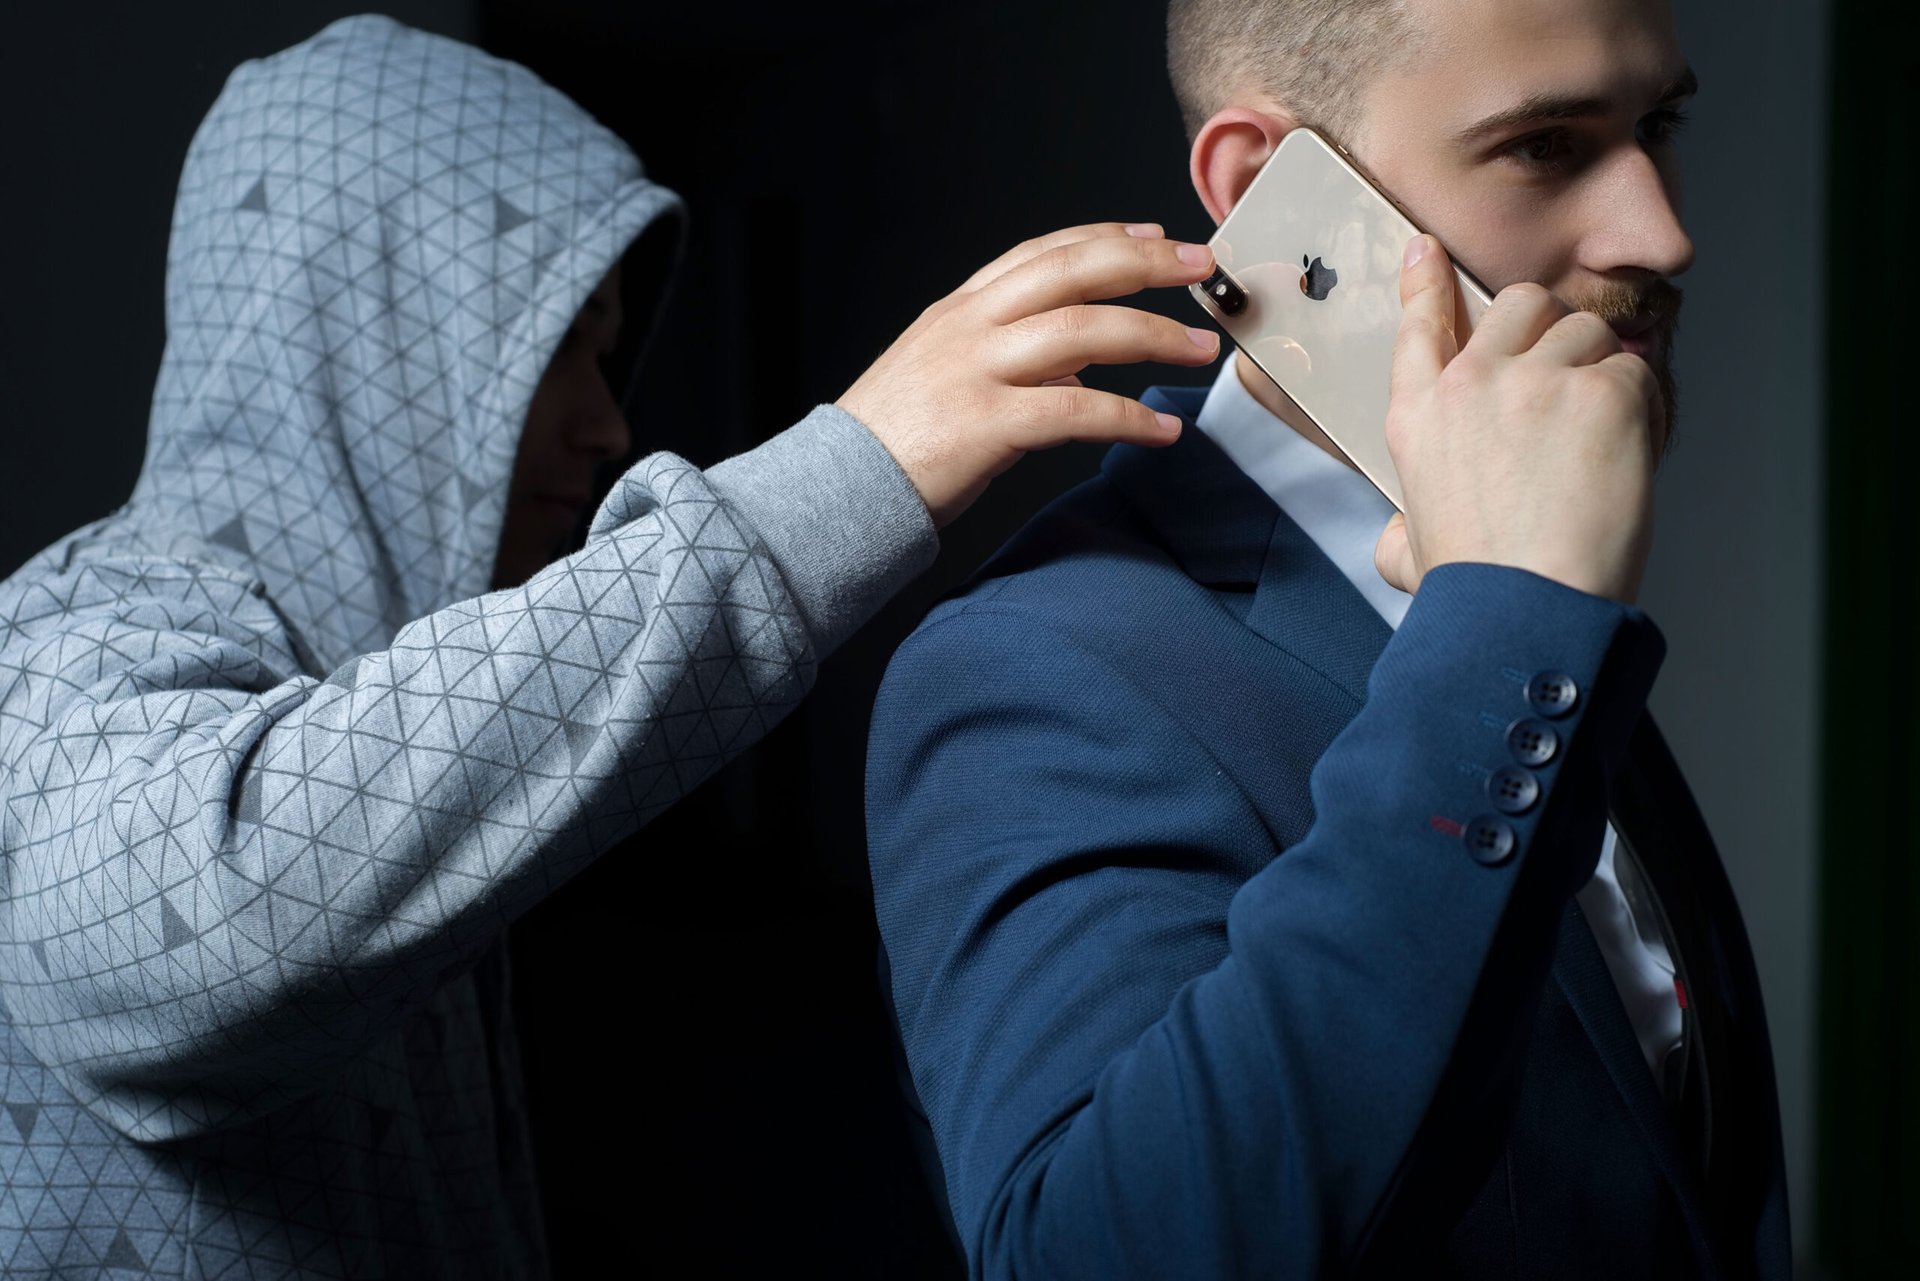 Thief wearing a hoodie stealing an iPhone from a businessman talking on his smartphone